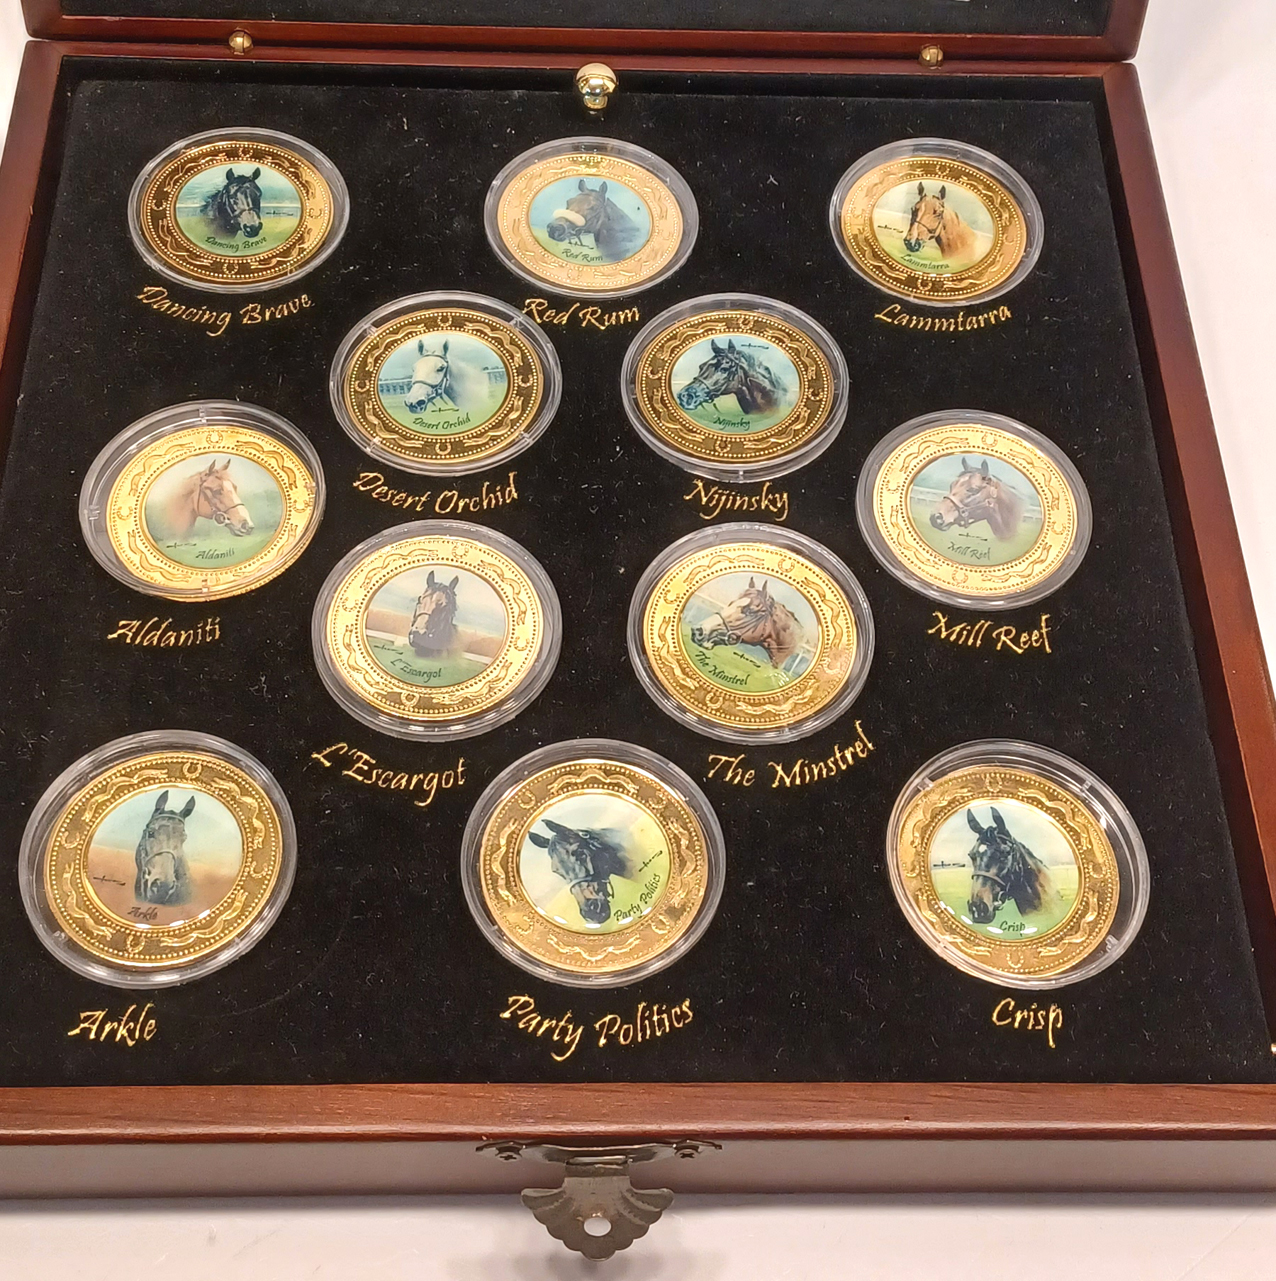 RACING LEGENDS COIN SET OF 12 CASED BY GRAHAM ISOM